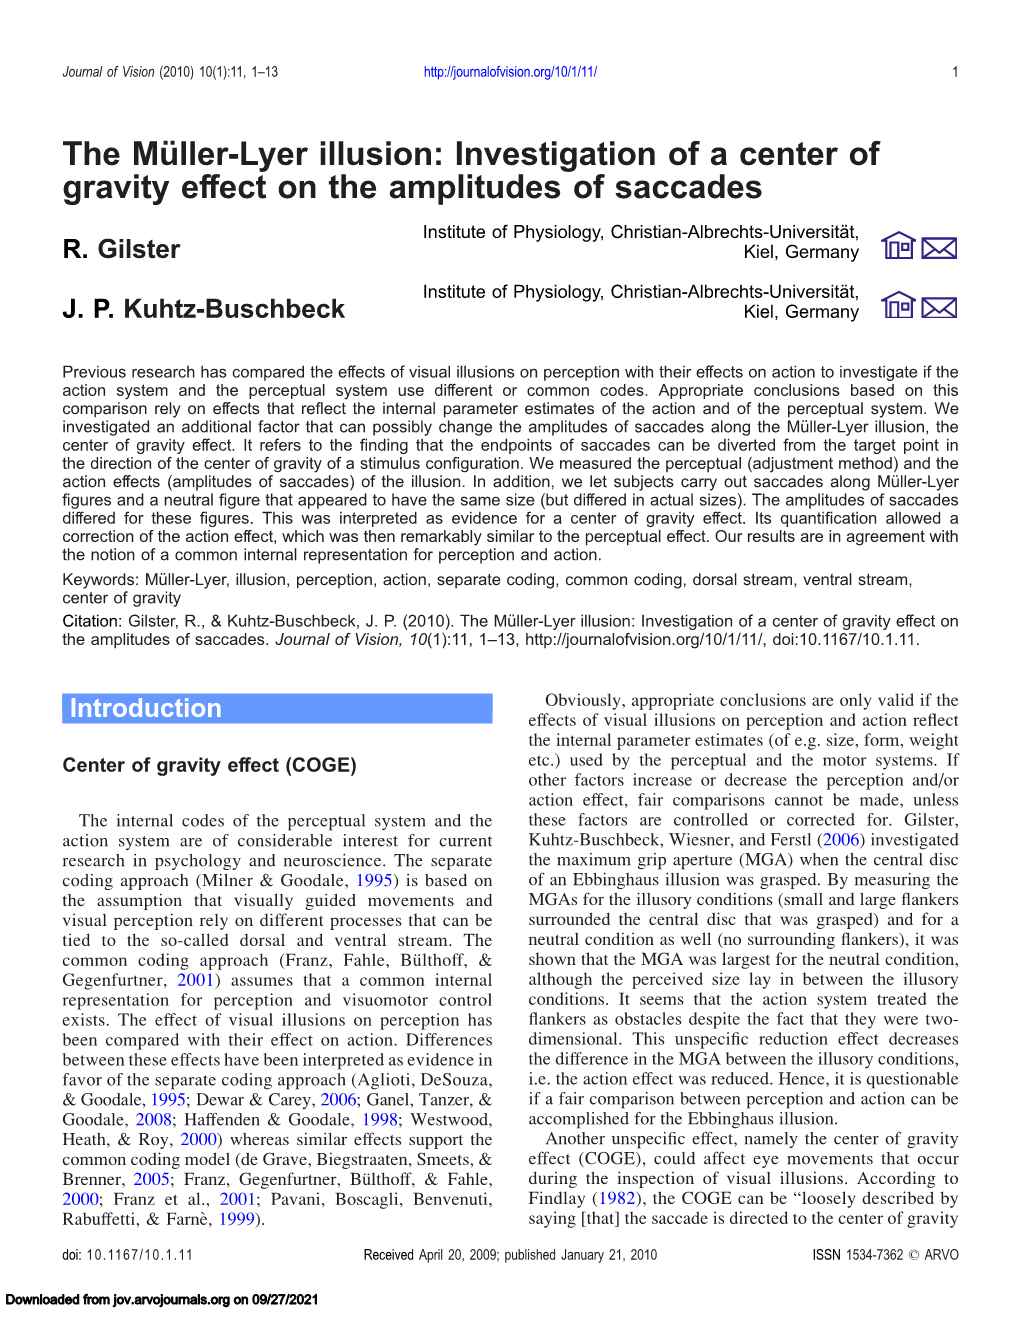 The Müller-Lyer Illusion: Investigation of a Center of Gravity Effect on the Amplitudes of Saccades